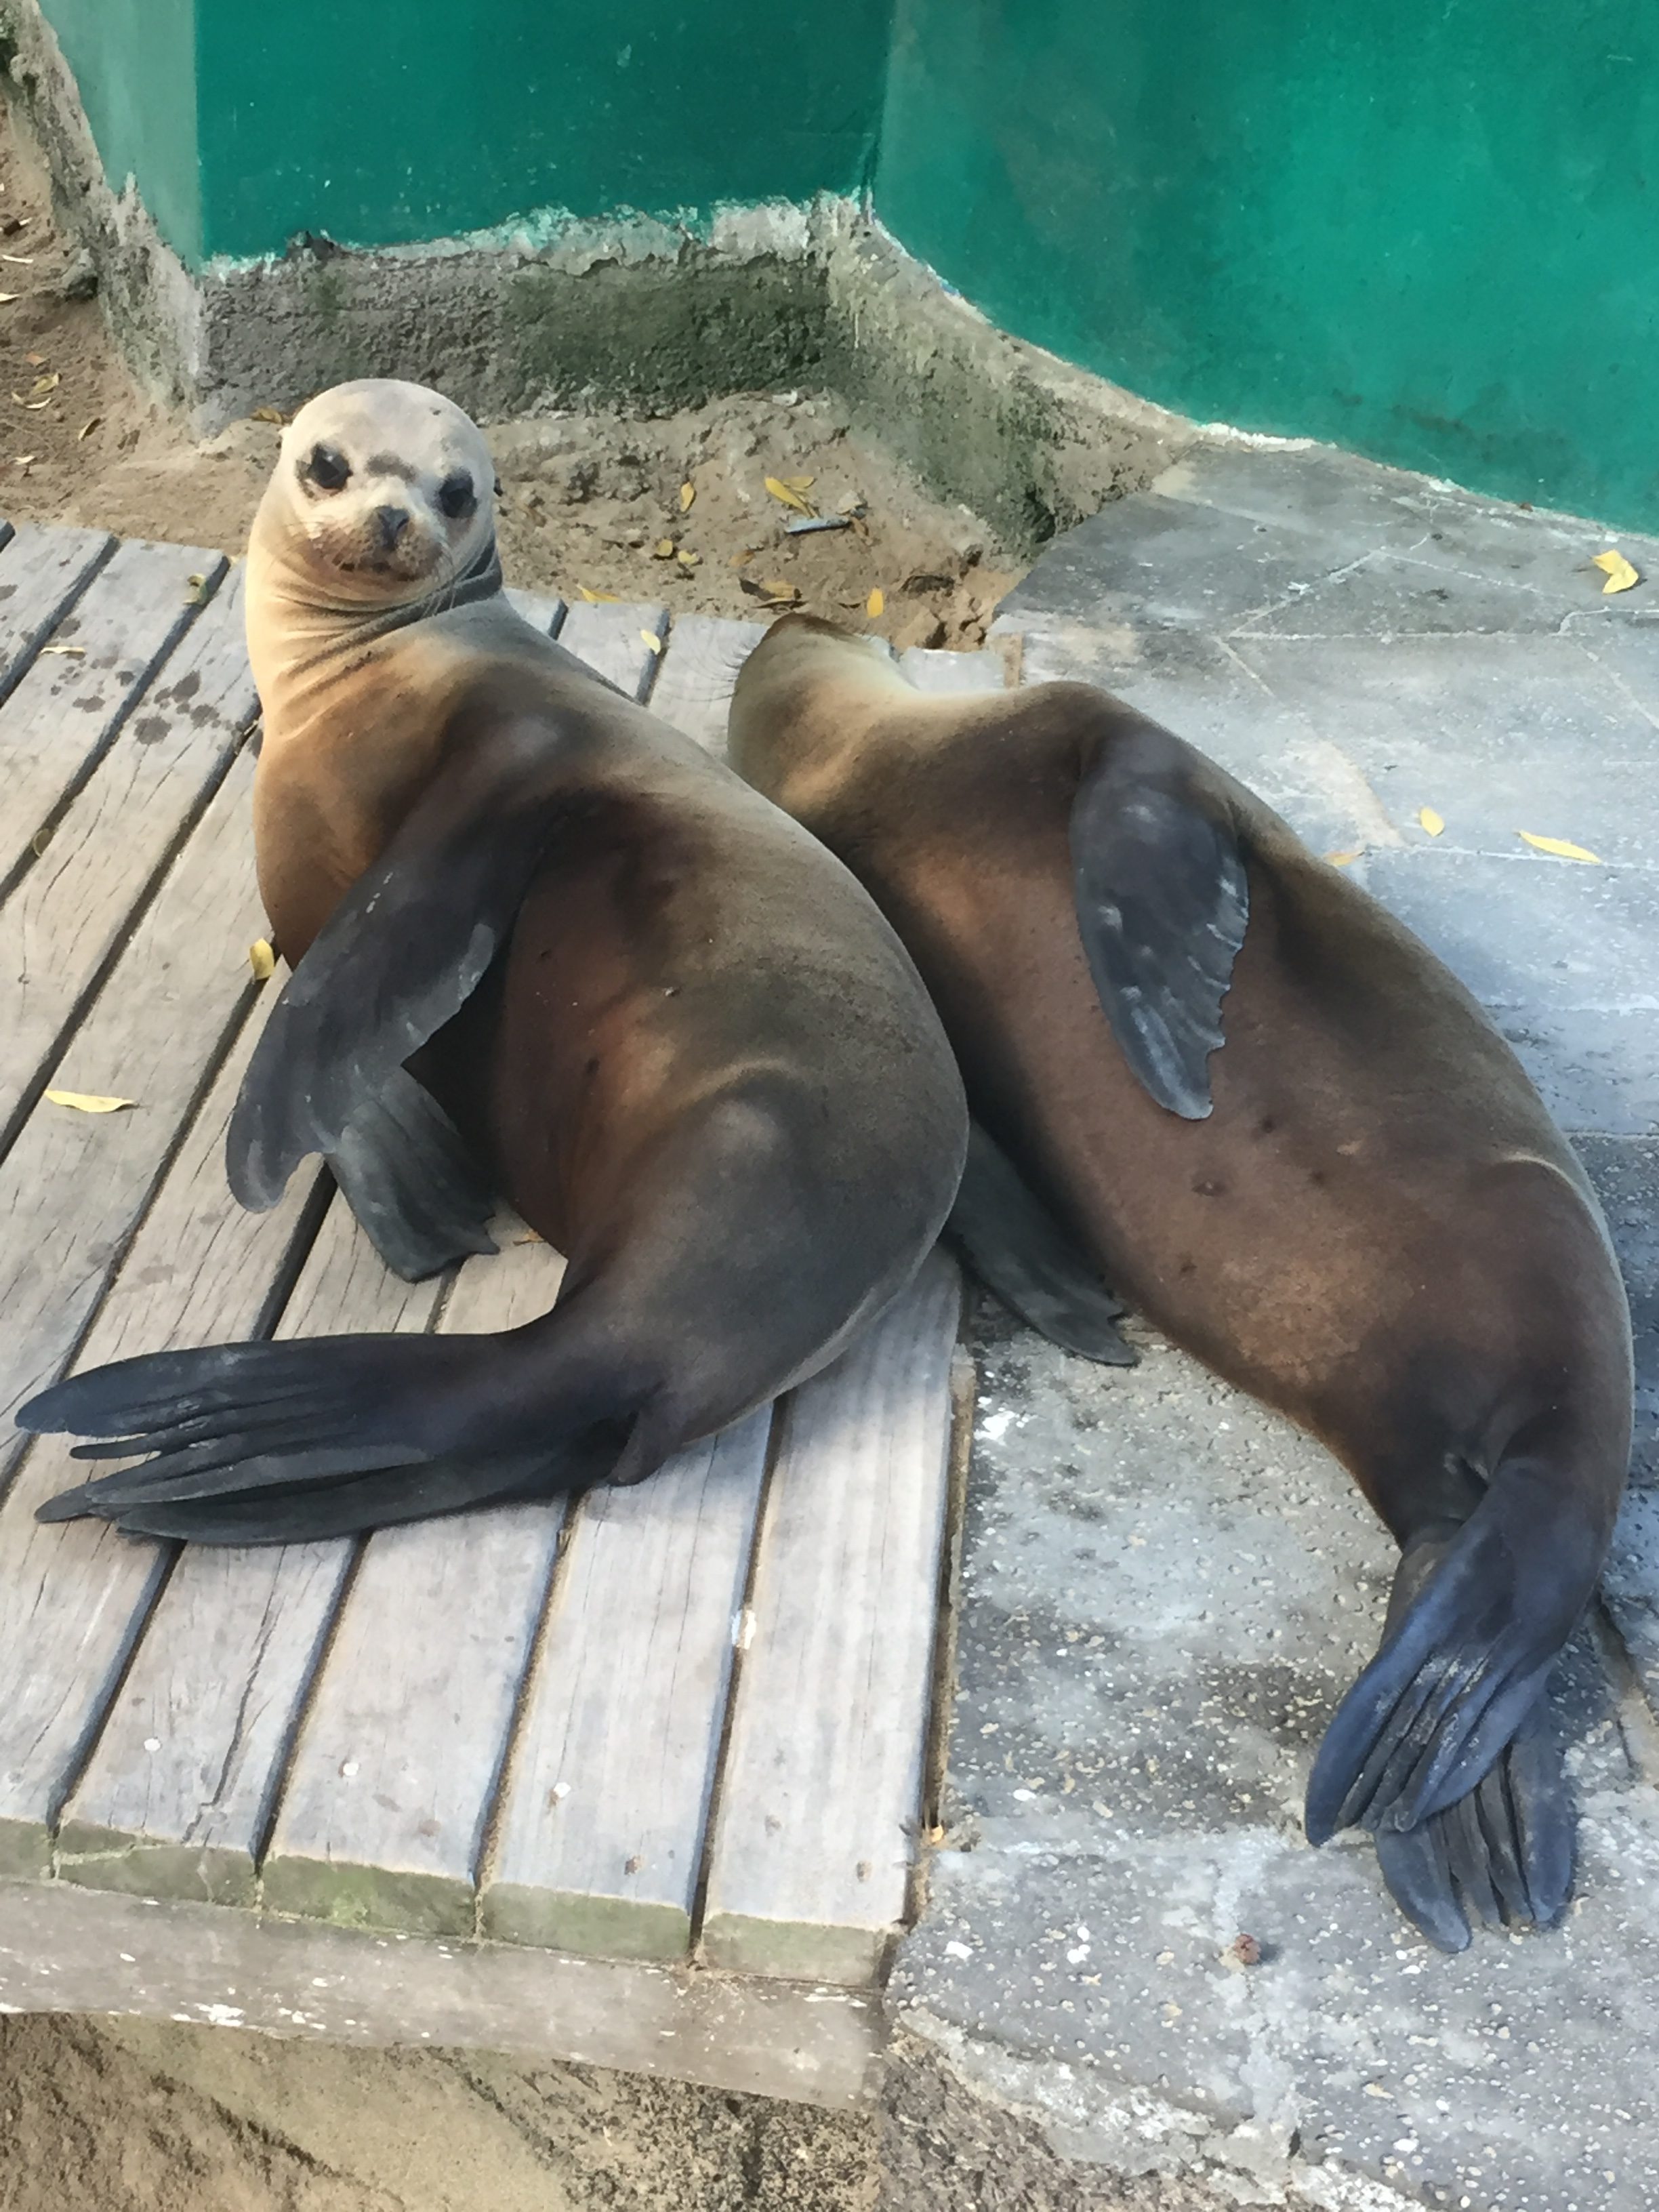 Sea Lions at Concha Perla on Isla isabela in the Galapagos Islands.